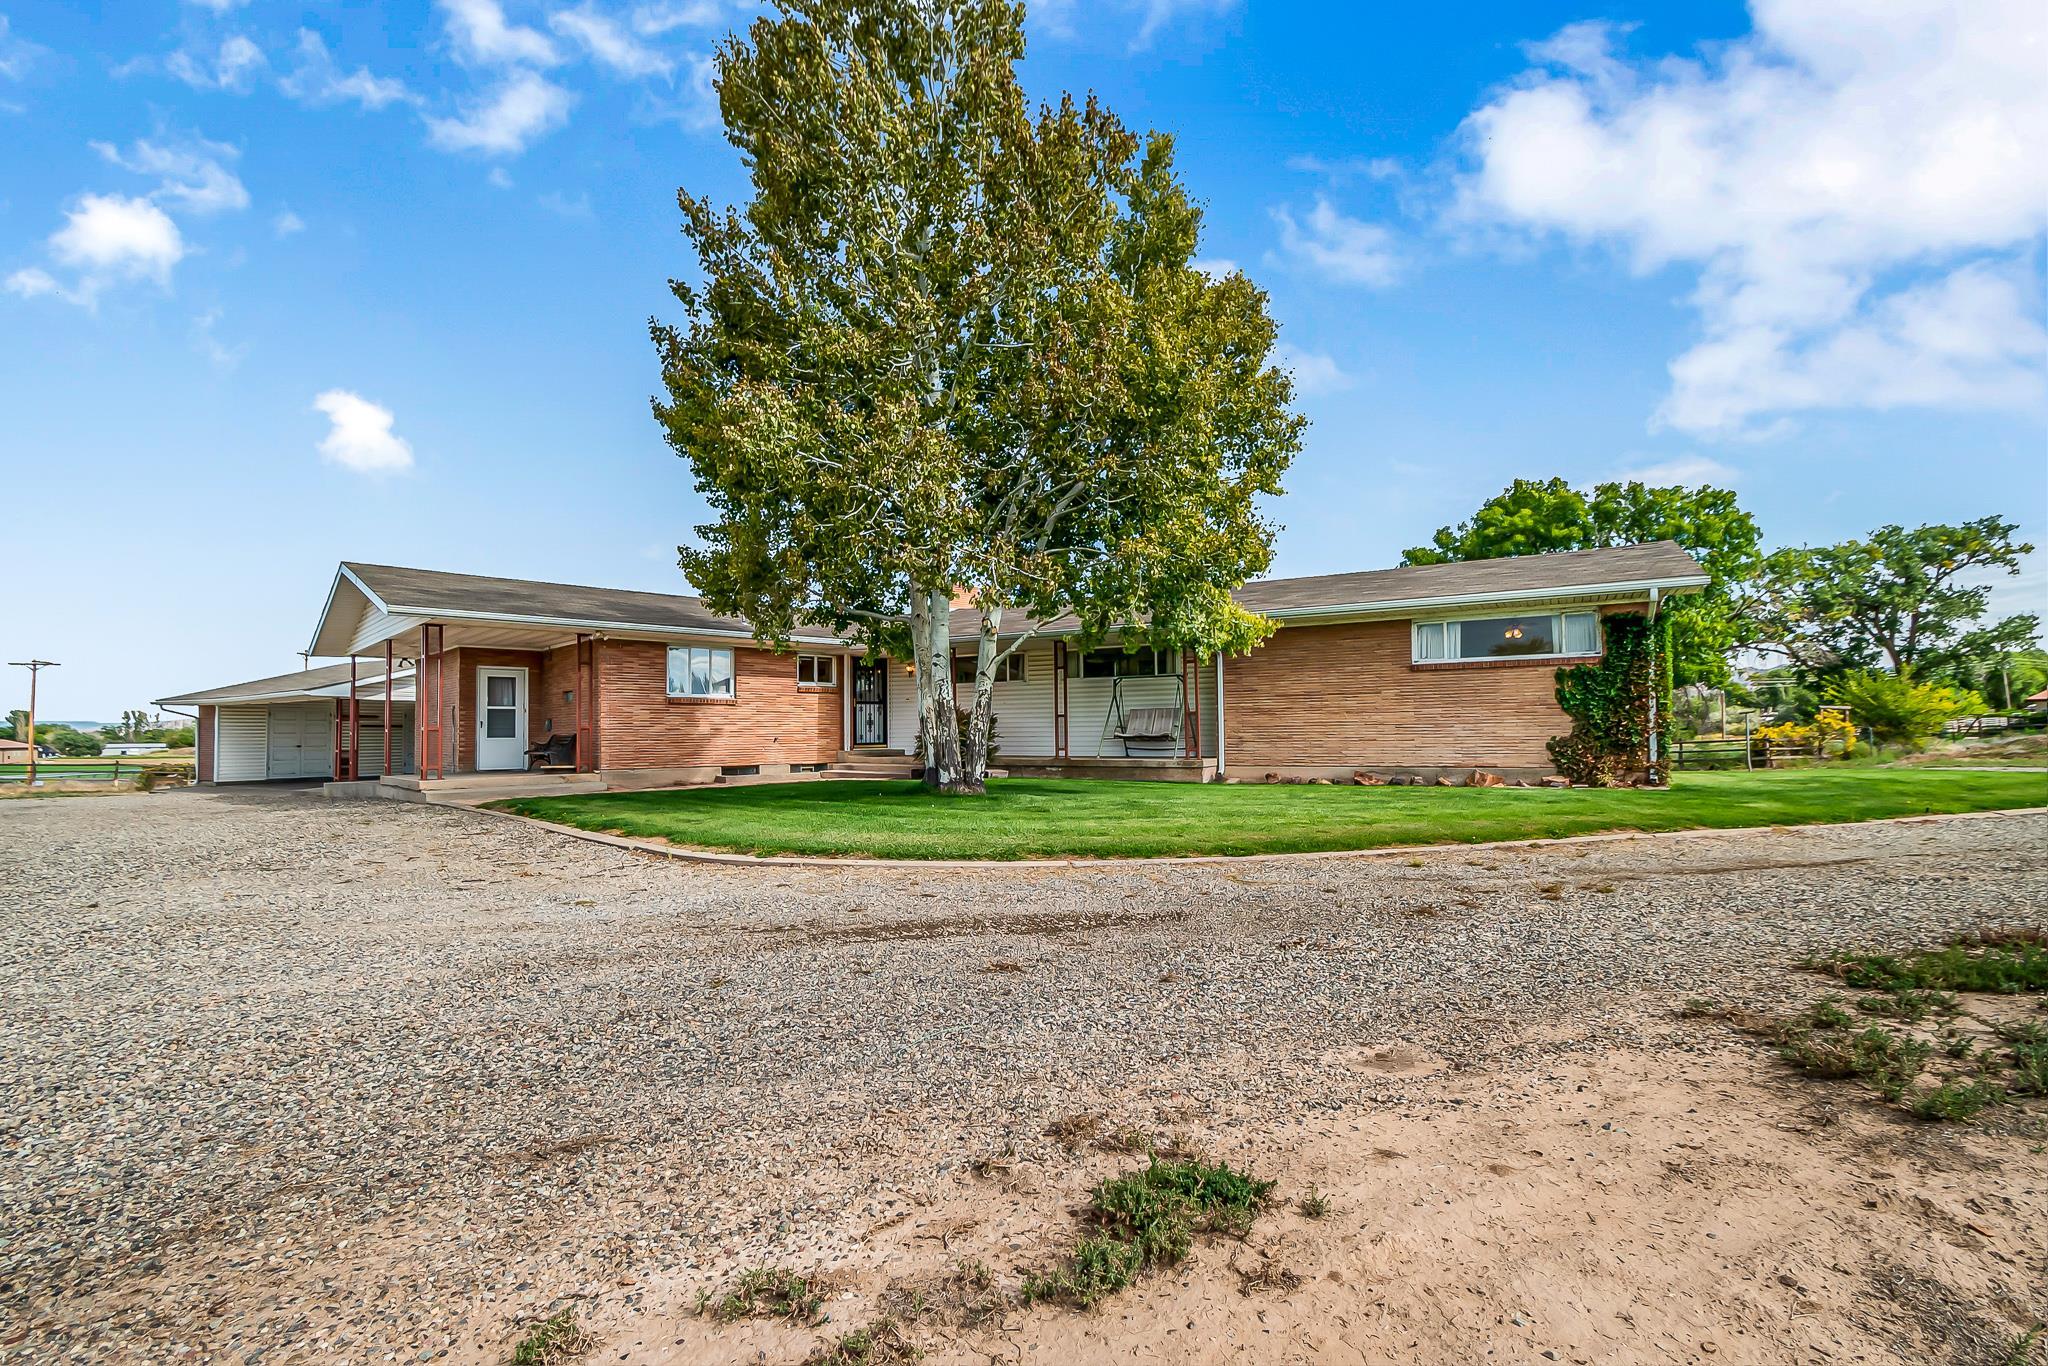 This is your chance to own small acreage with no HOA in North/Northwest Grand Junction. Right at 3 acres with a 2962 square foot home. Home has been meticulously cared for. There are 2 living spaces and an option for a mother-in-law set up in the walkout basement. Home has brand new roof, updated electrical, central air conditioning, newer septic system, and gorgeous views!!